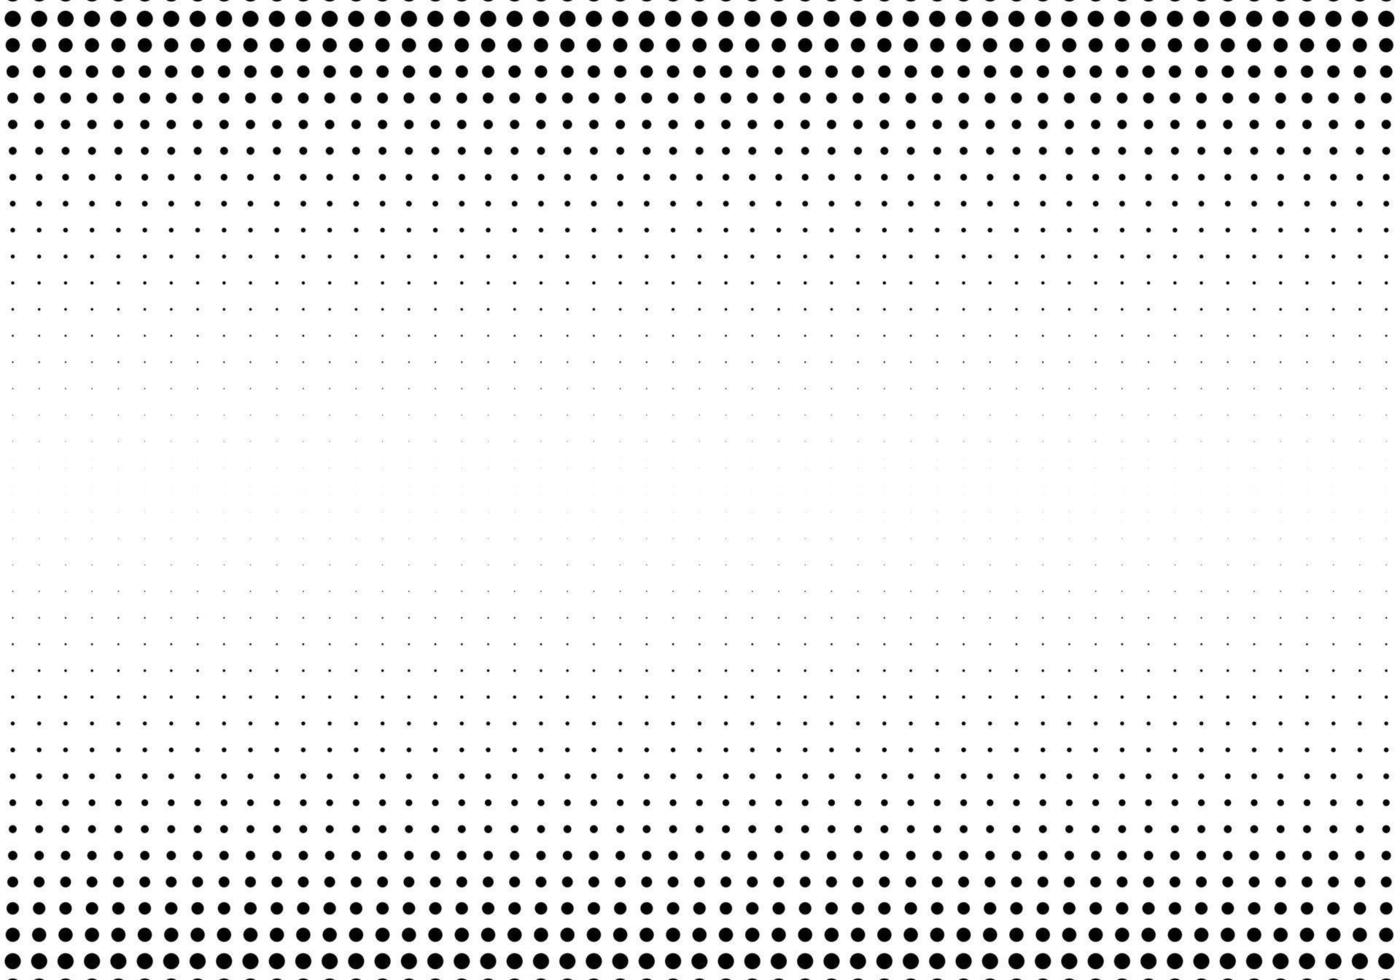 Abstract black and white halftone background vector